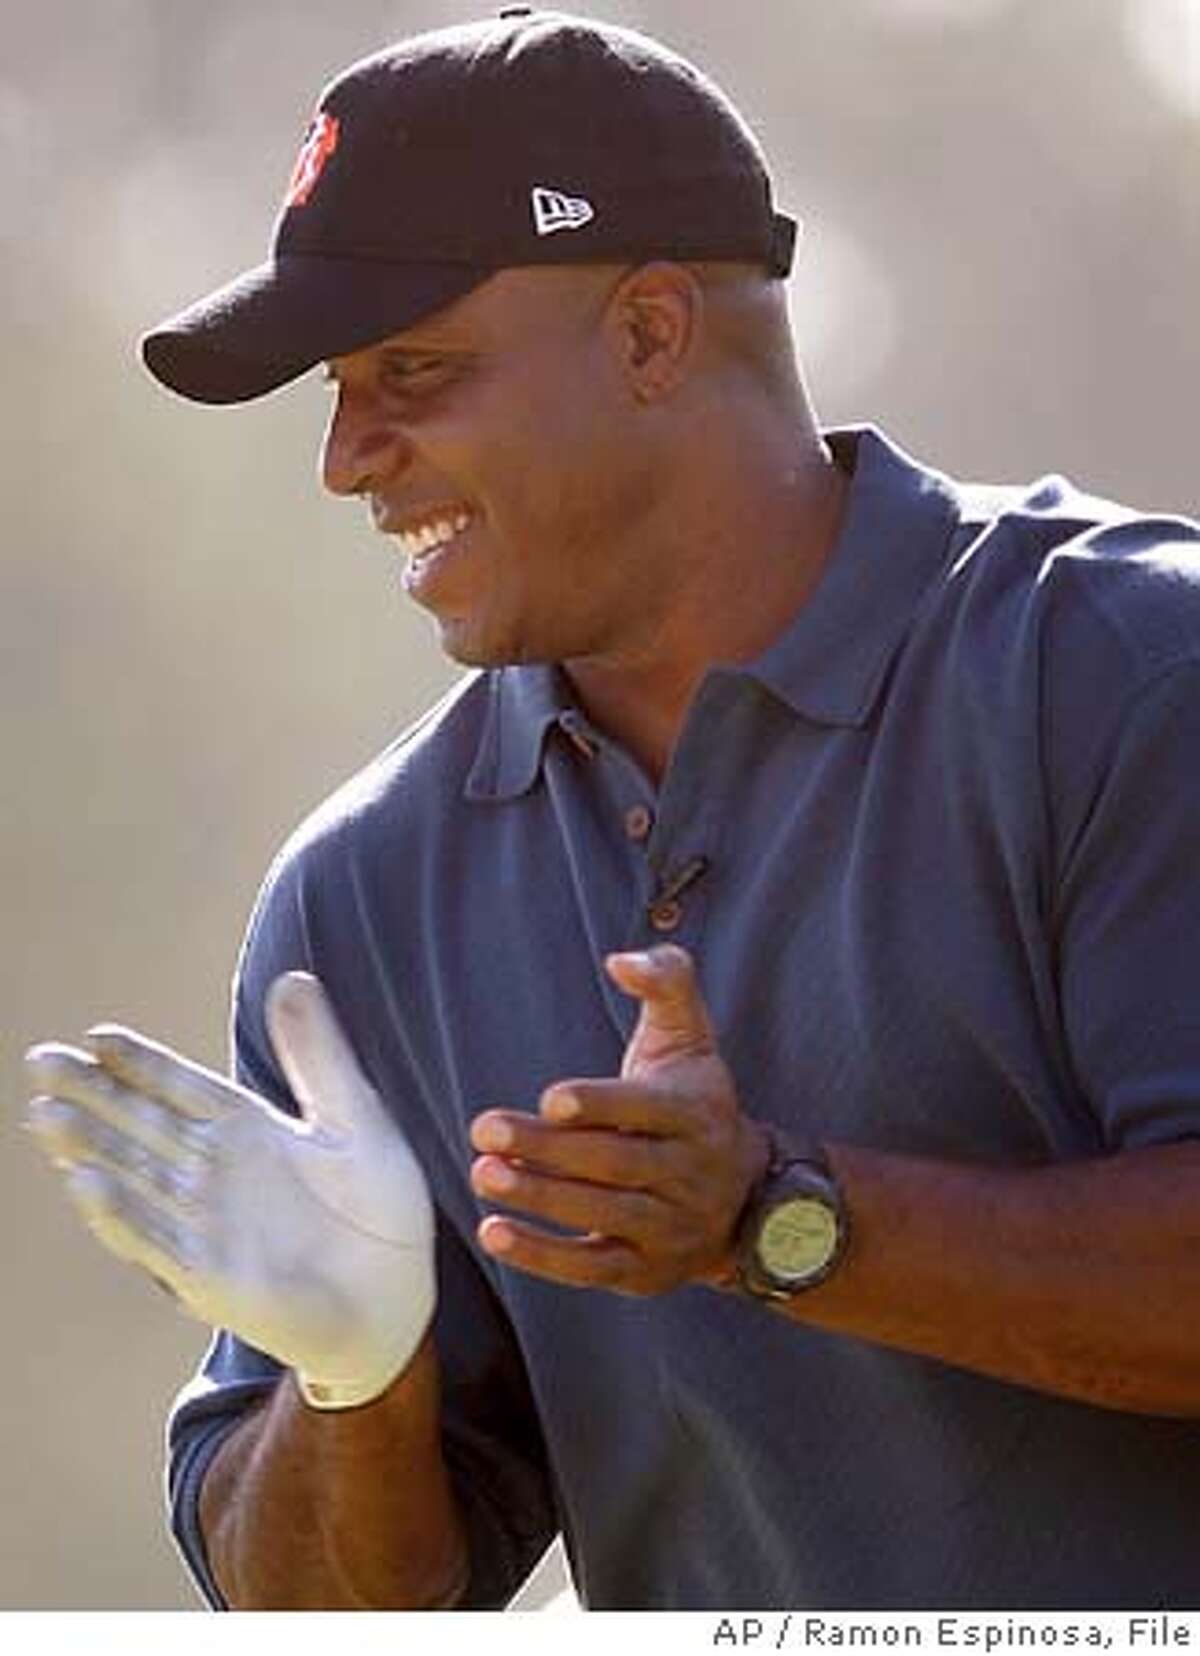 San Francisco Giants baseball team outfielder Barry Bonds claps during the 20th annual Juan Marichal Golf Classic in Juan Dolio, Dominican Republic, Saturday Jan. 21, 2006. (AP Photo/Ramon Espinosa) ***EFE OUT***